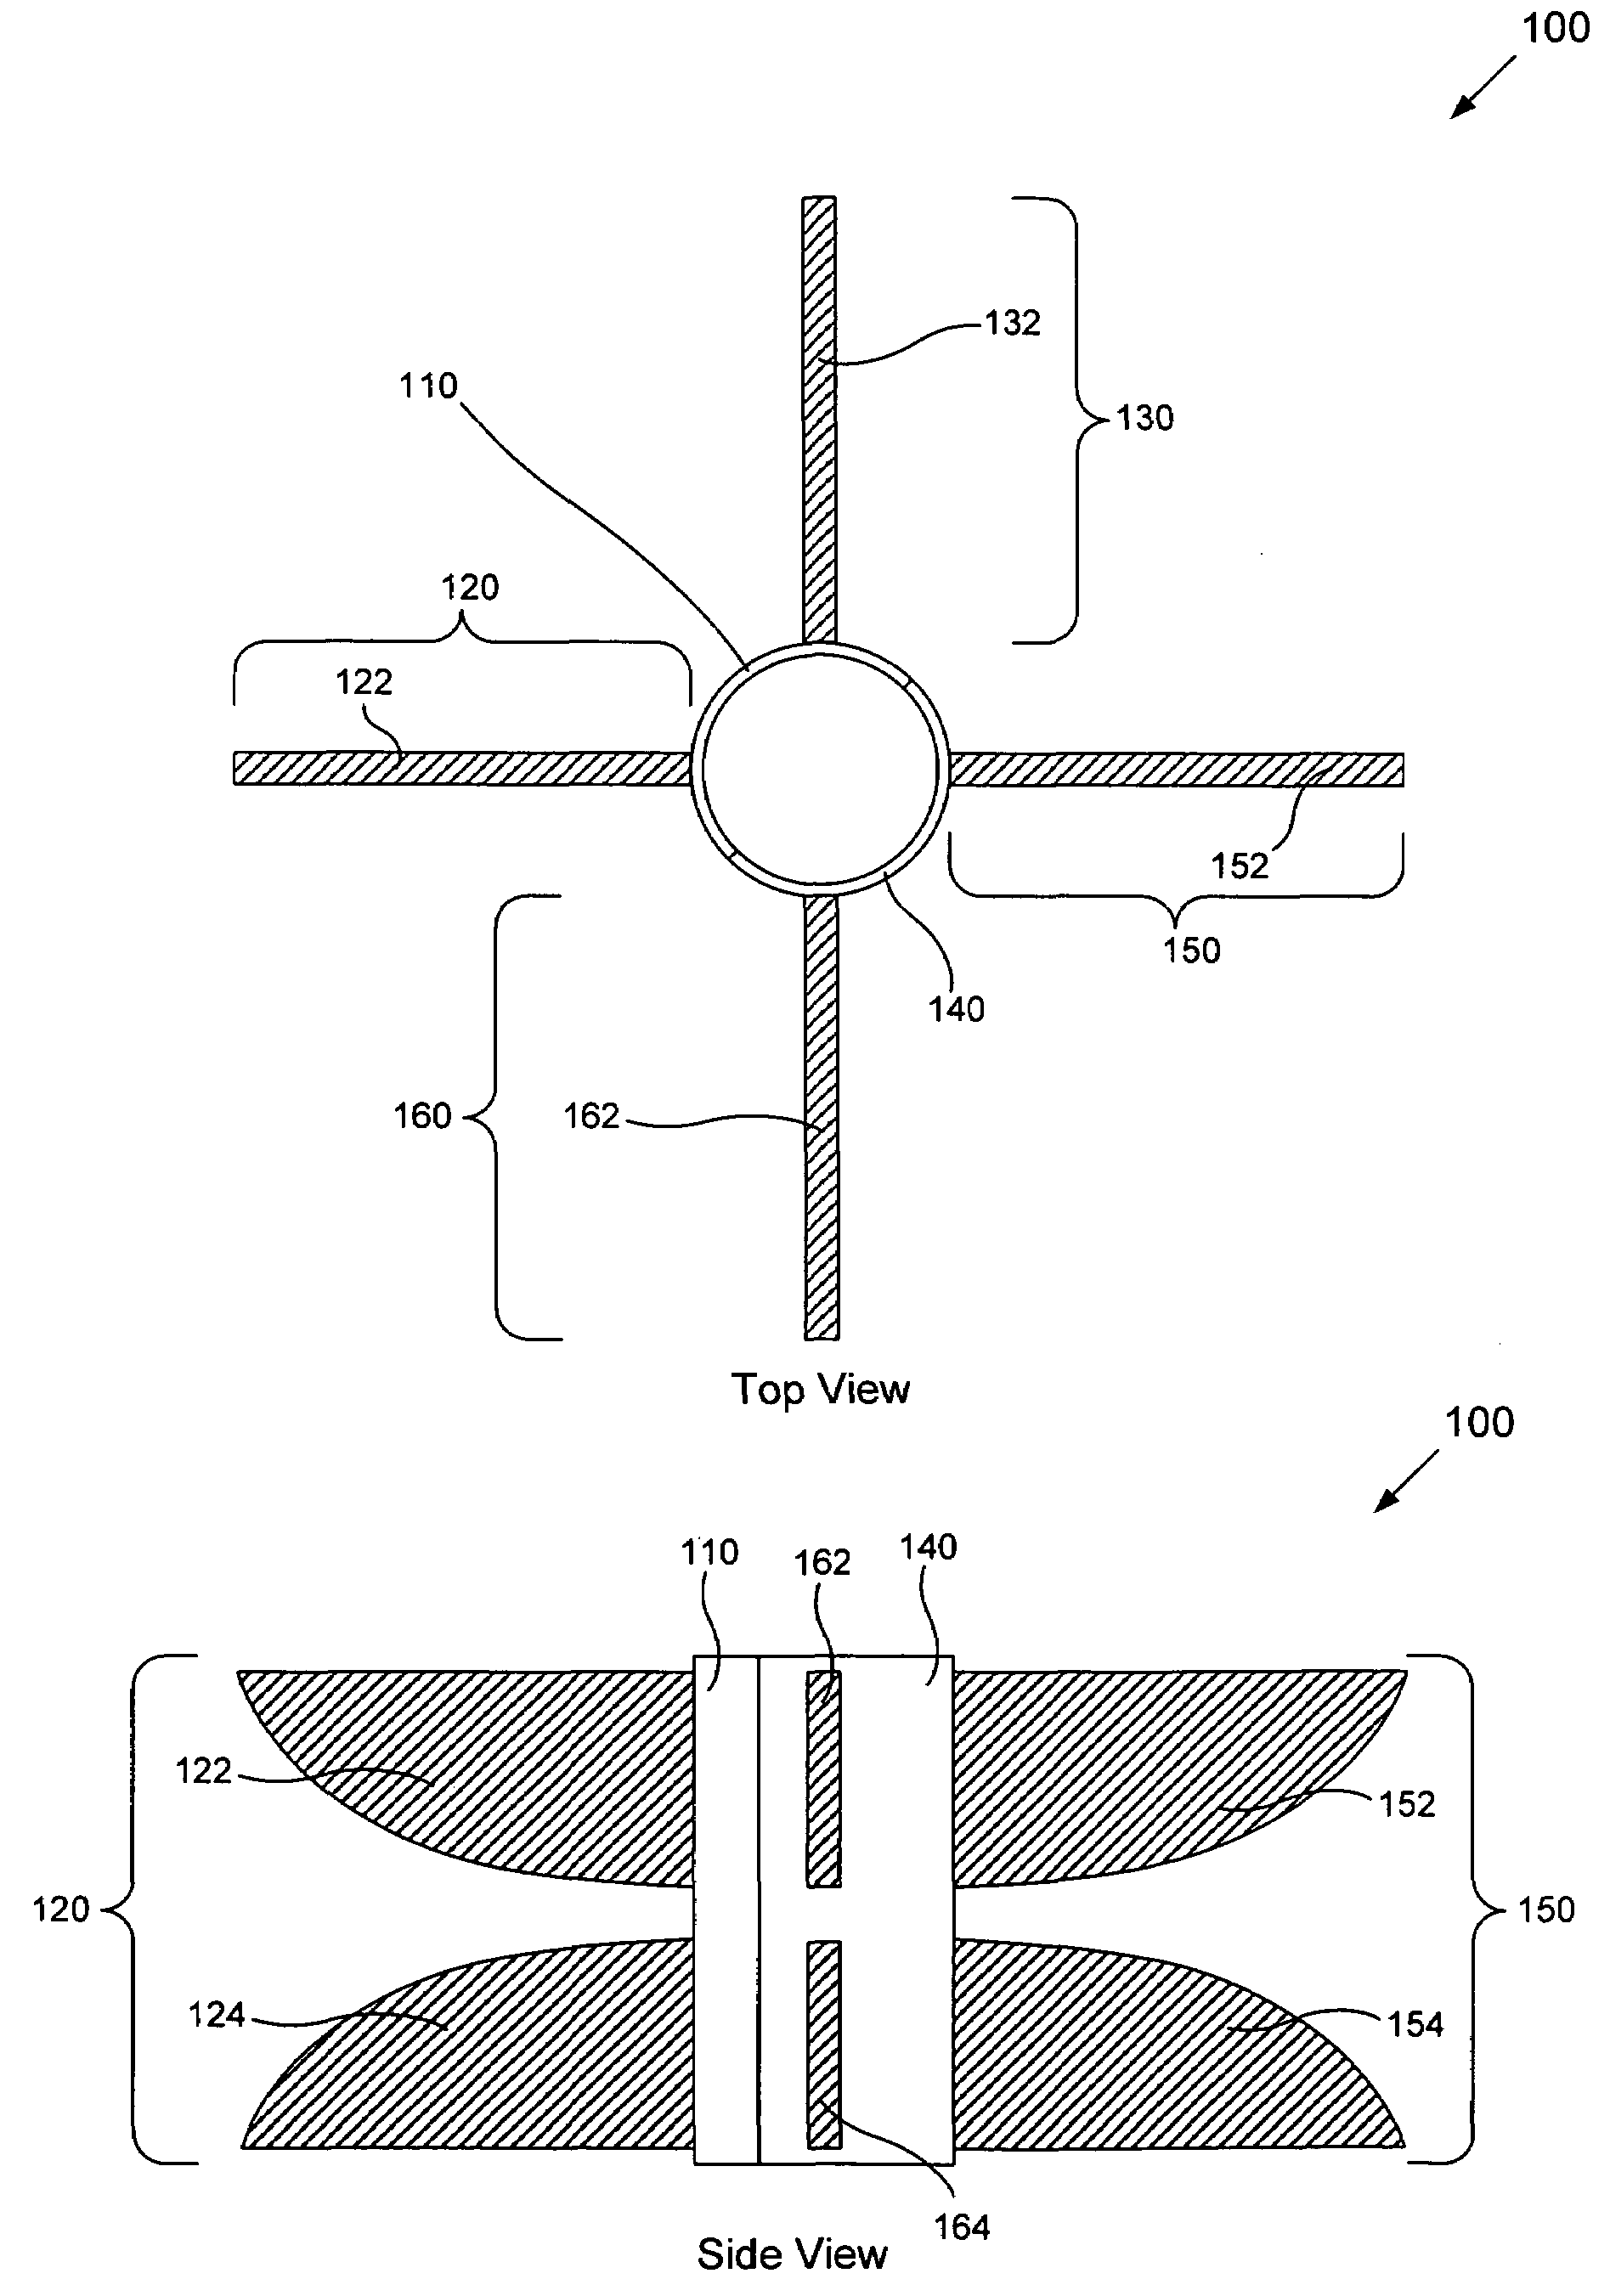 Tapered slot antenna cylindrical array